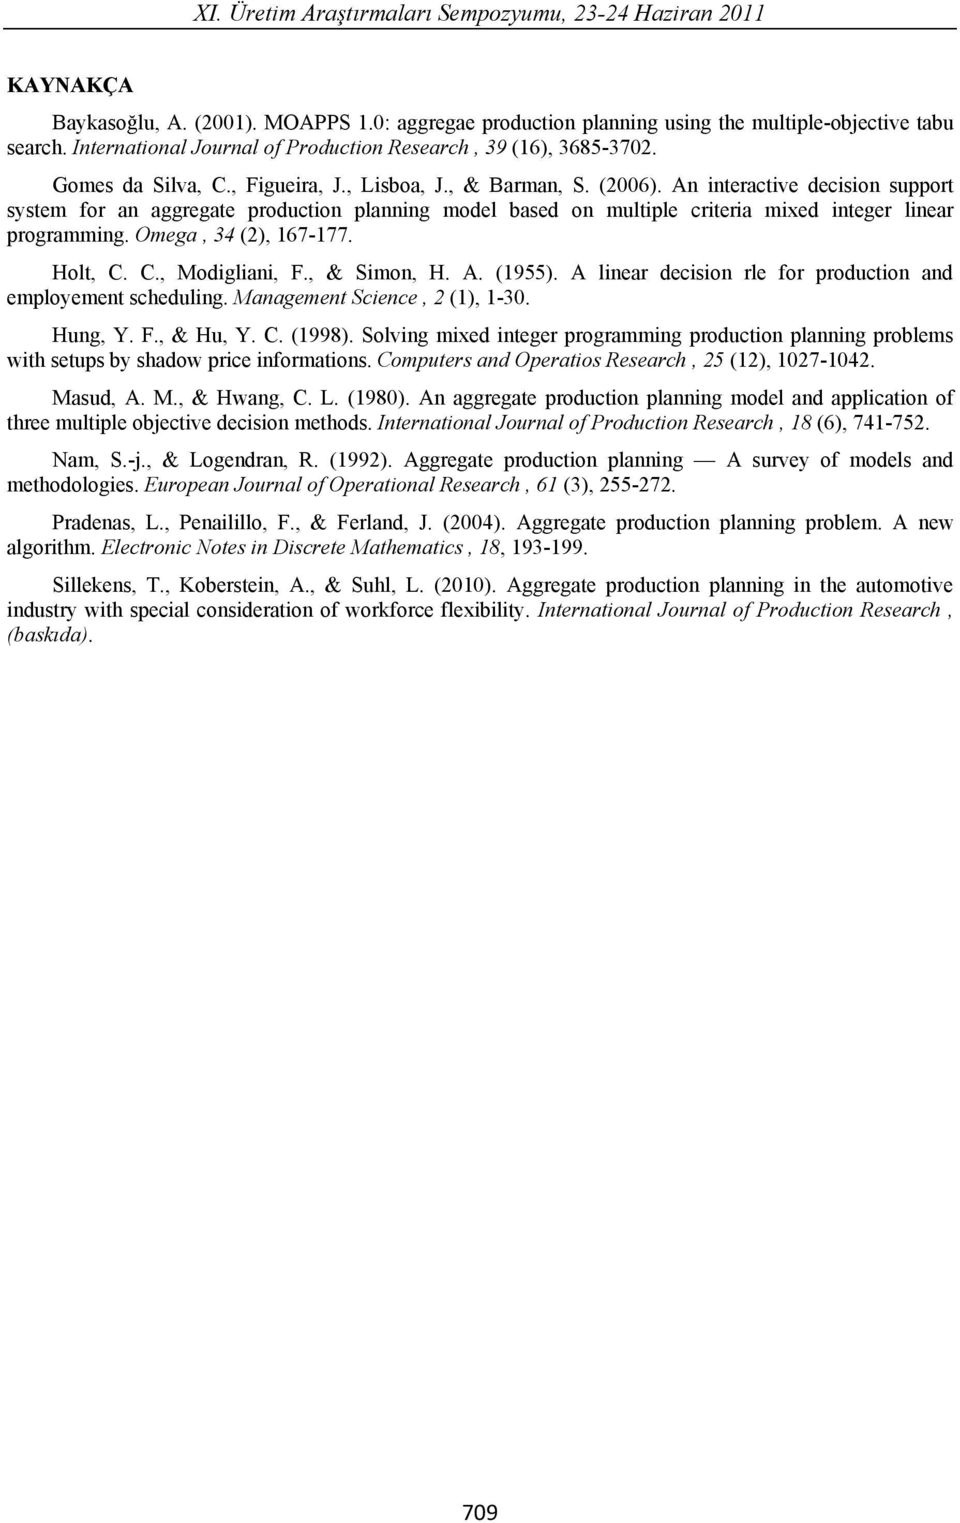 An ineracive decision suppor sysem for an aggregae producion planning model based on muliple crieria mixed ineger linear programming. Omega, 34 (2), 67-77. Hol, C. C., Modigliani, F., & Simon, H. A.